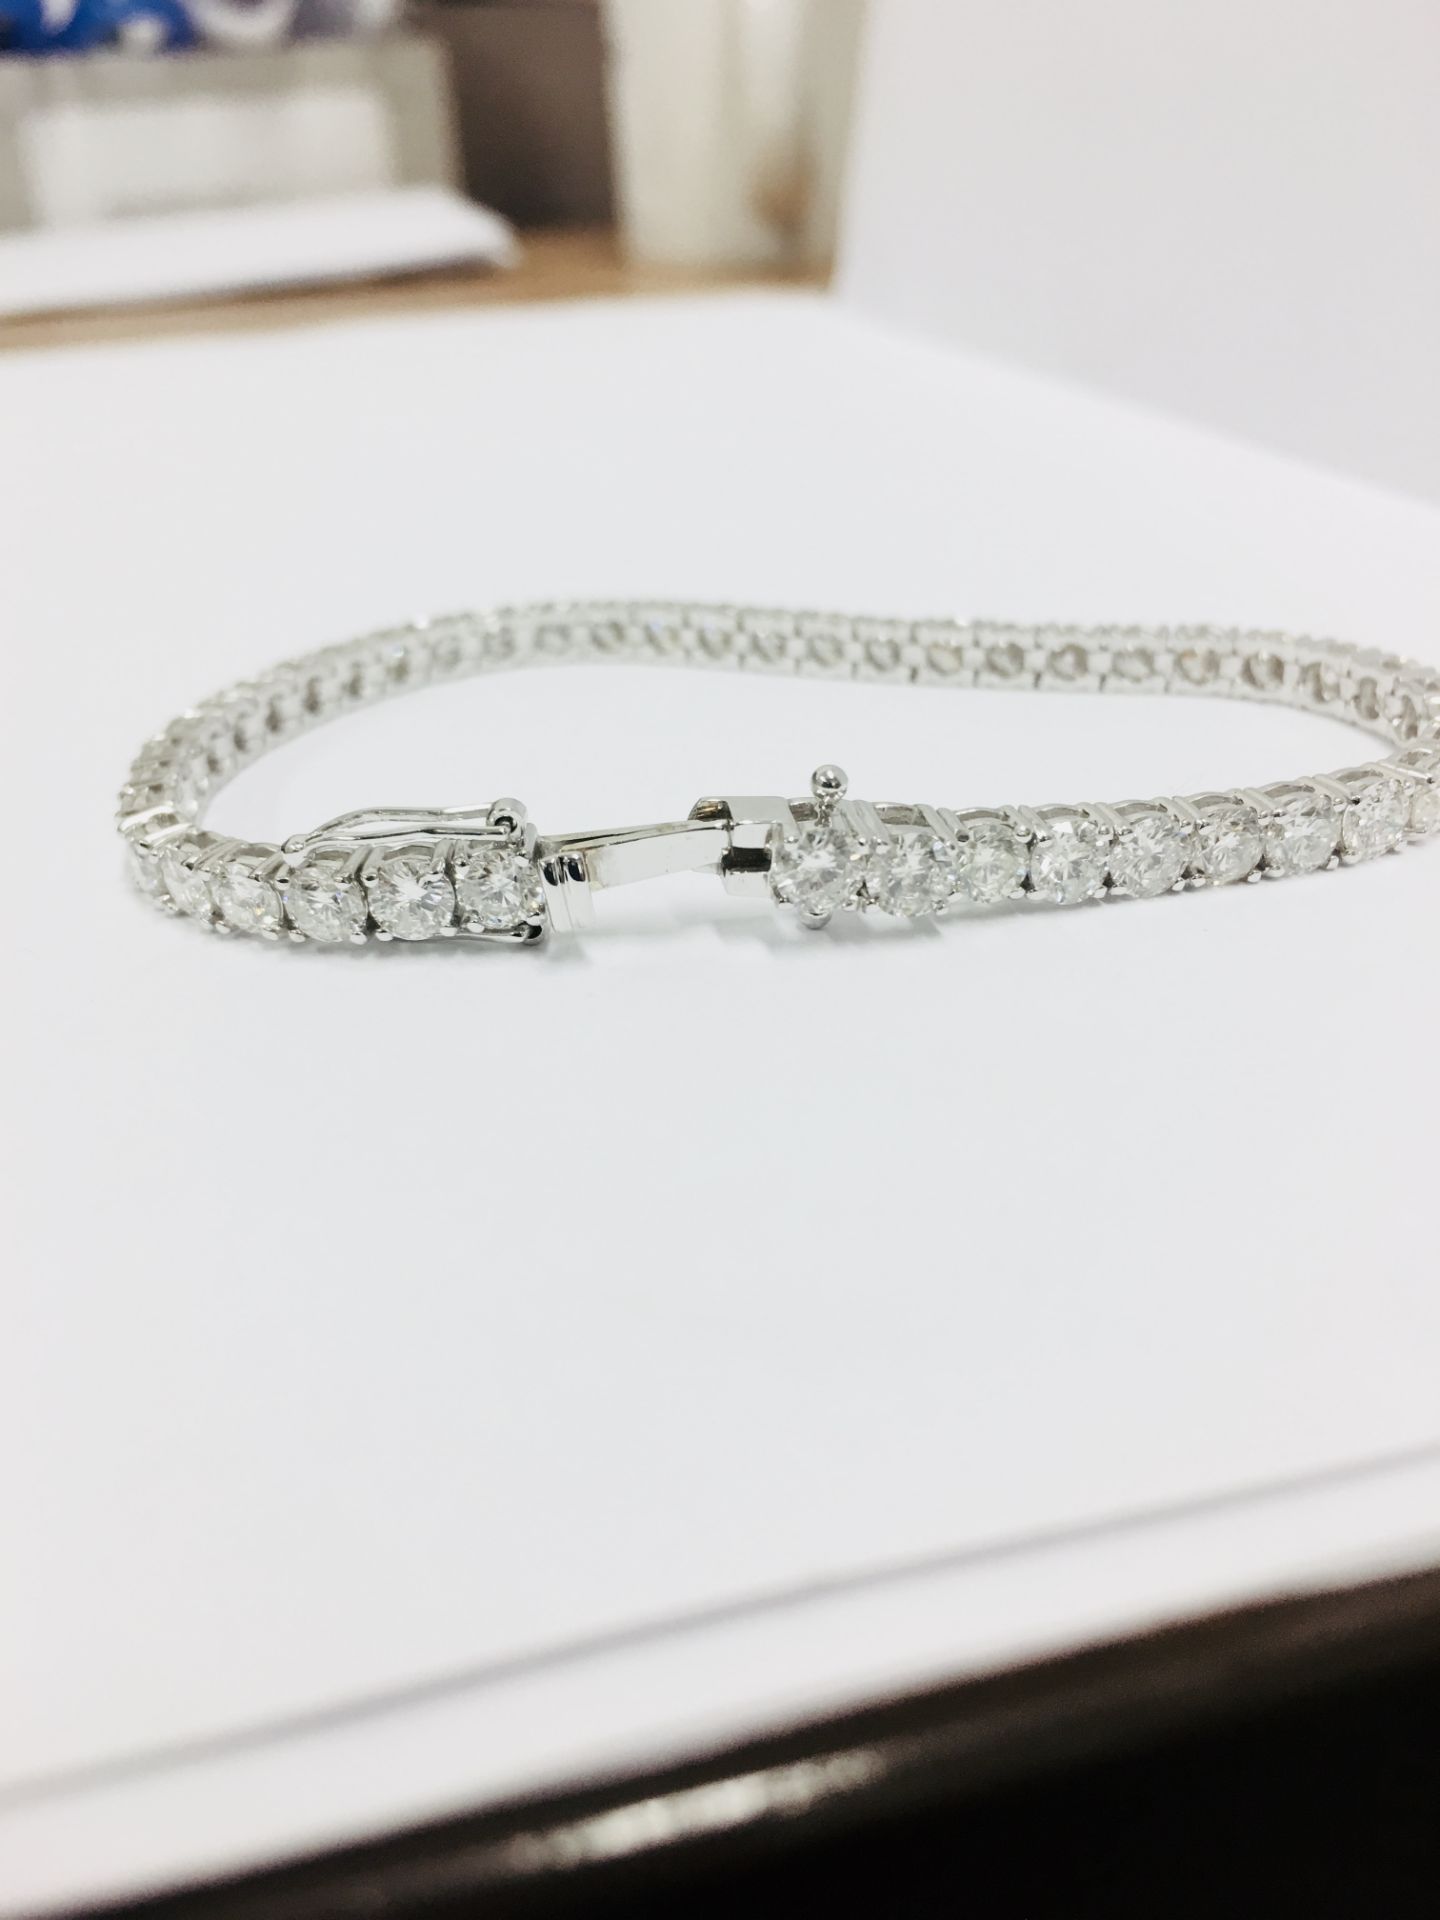 10.50ct Diamond tennis bracelet set with brilliant cut diamonds of H colour, si1 clarity. All set in - Image 2 of 7